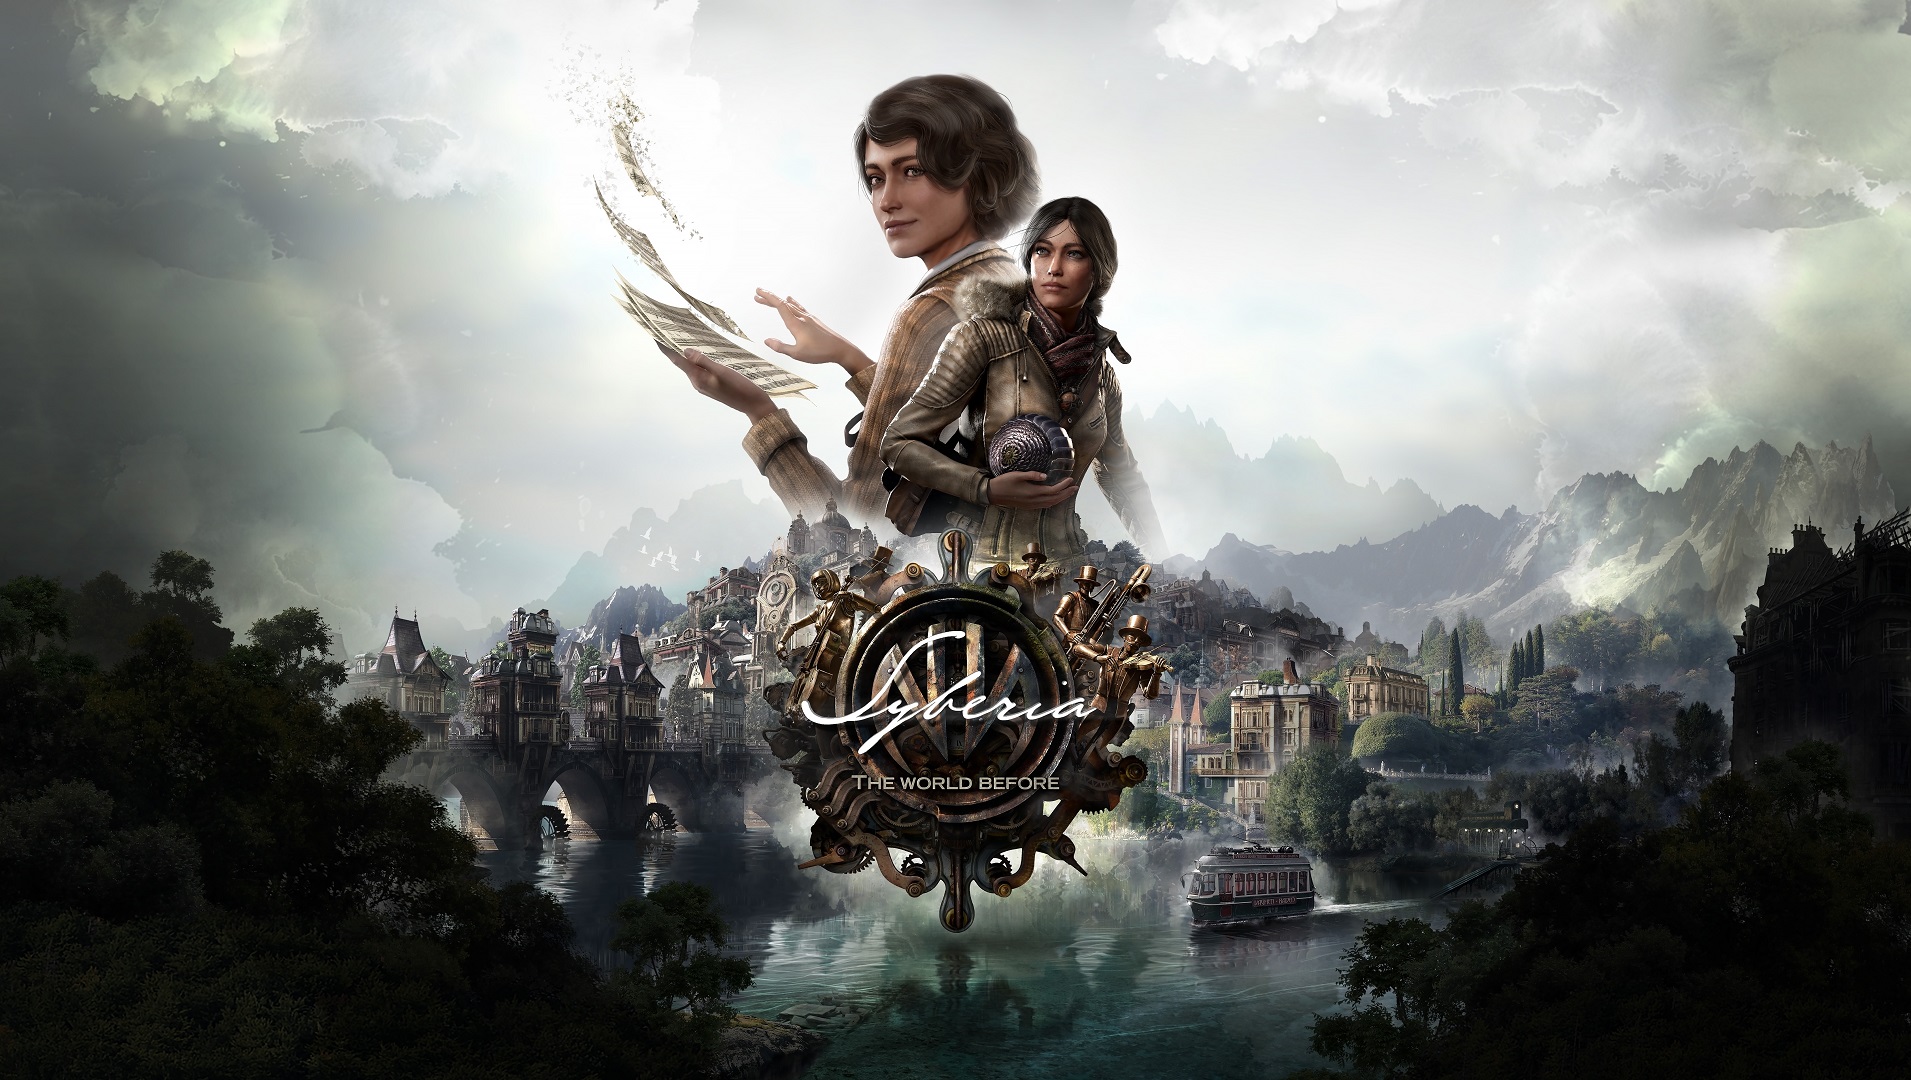 Syberia The World Before 08 19 21 ១